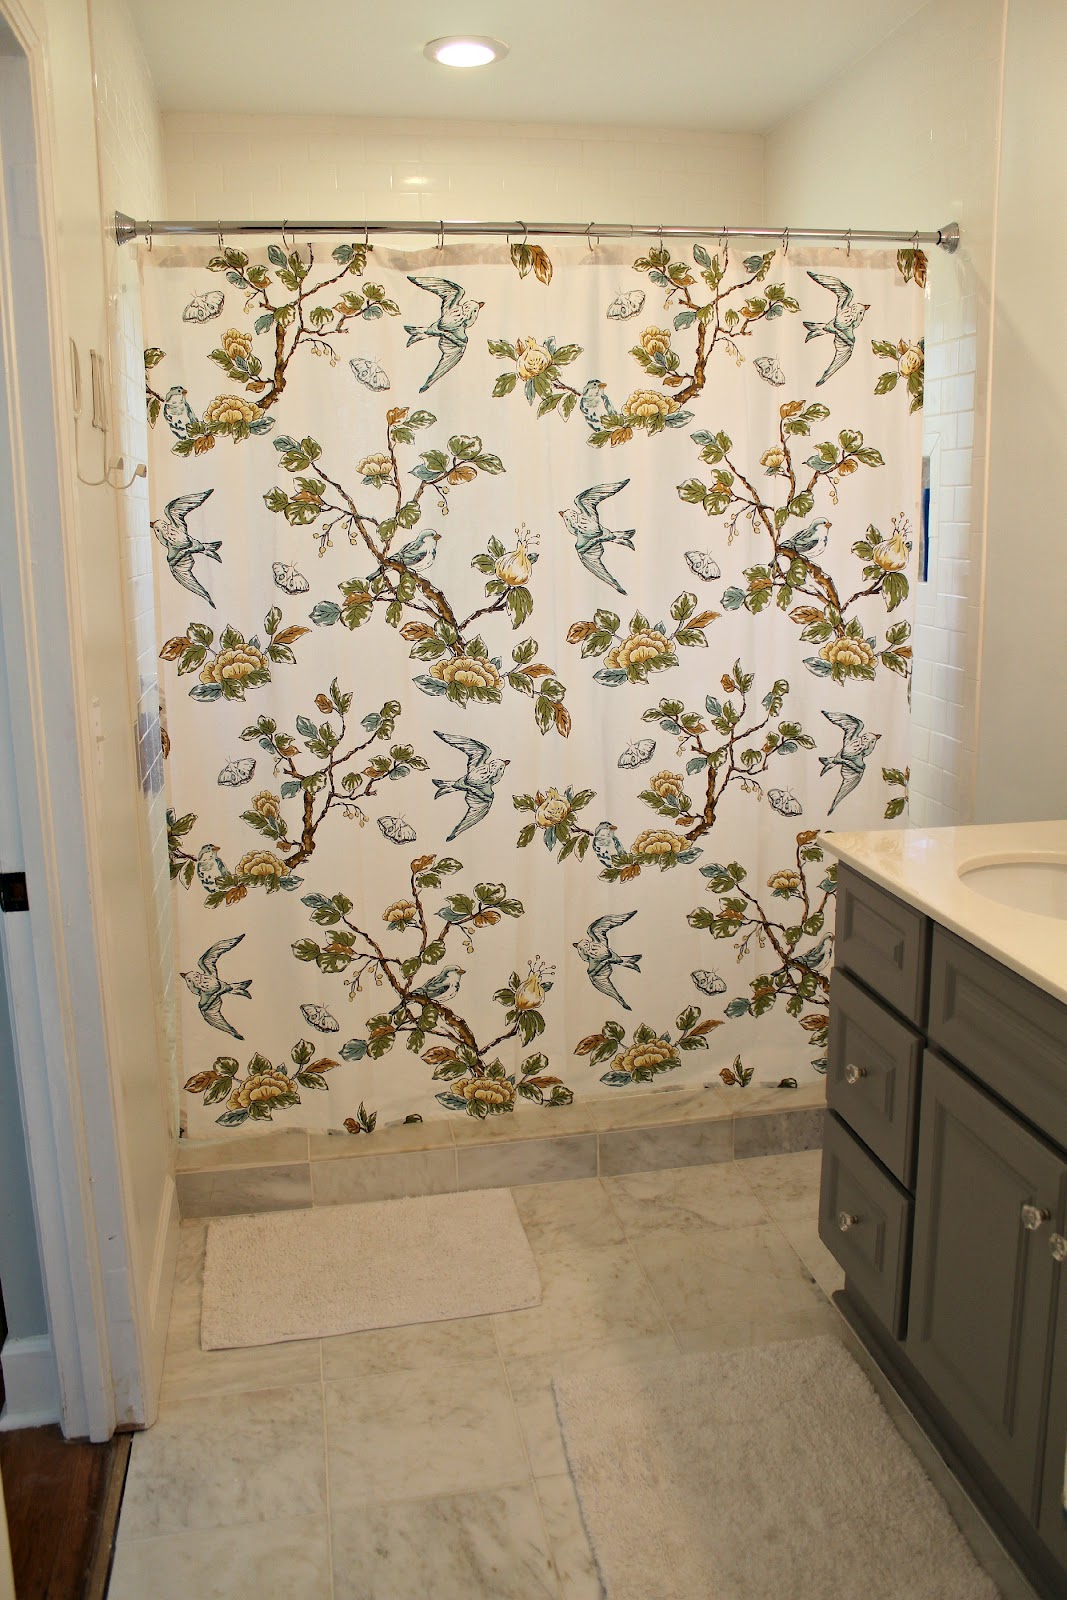 wallpaper and also needed a shower curtain? Our master bathroom ...